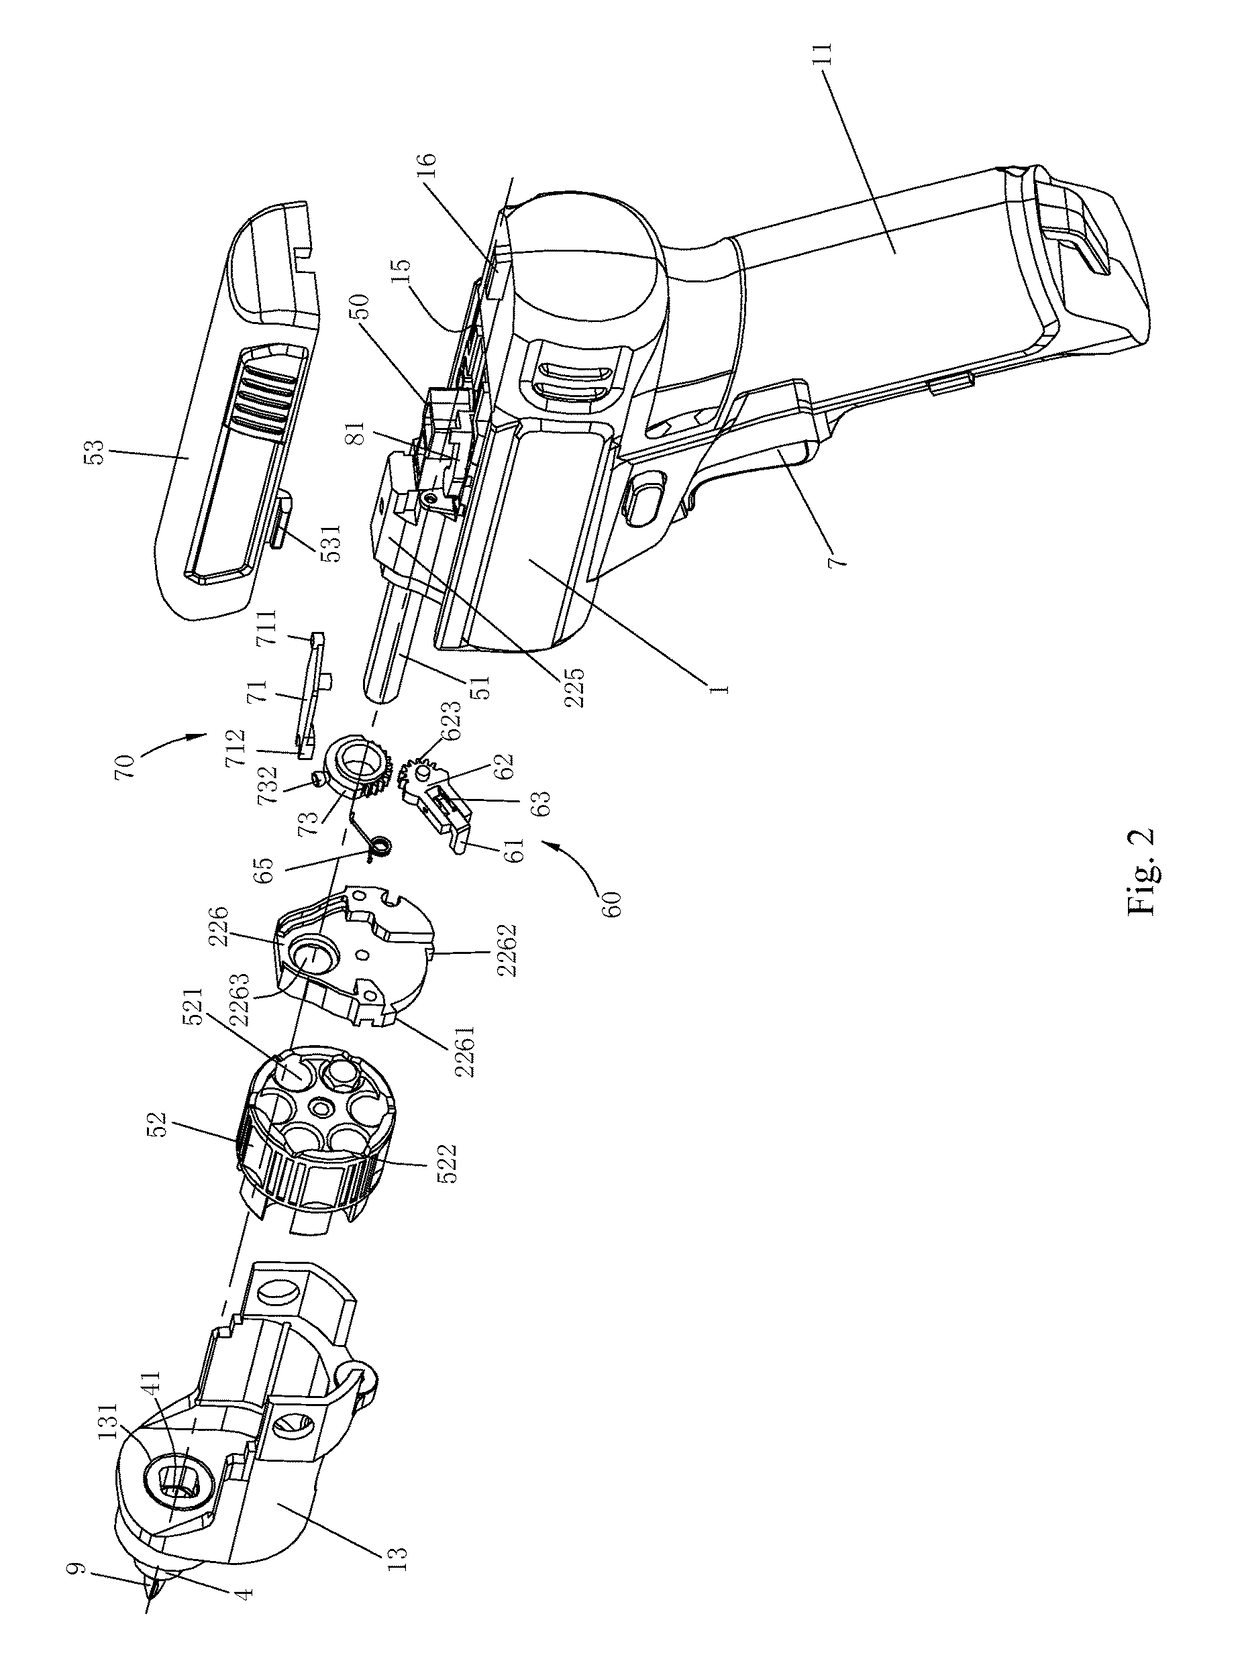 Power tool and operating method for use on the power tool